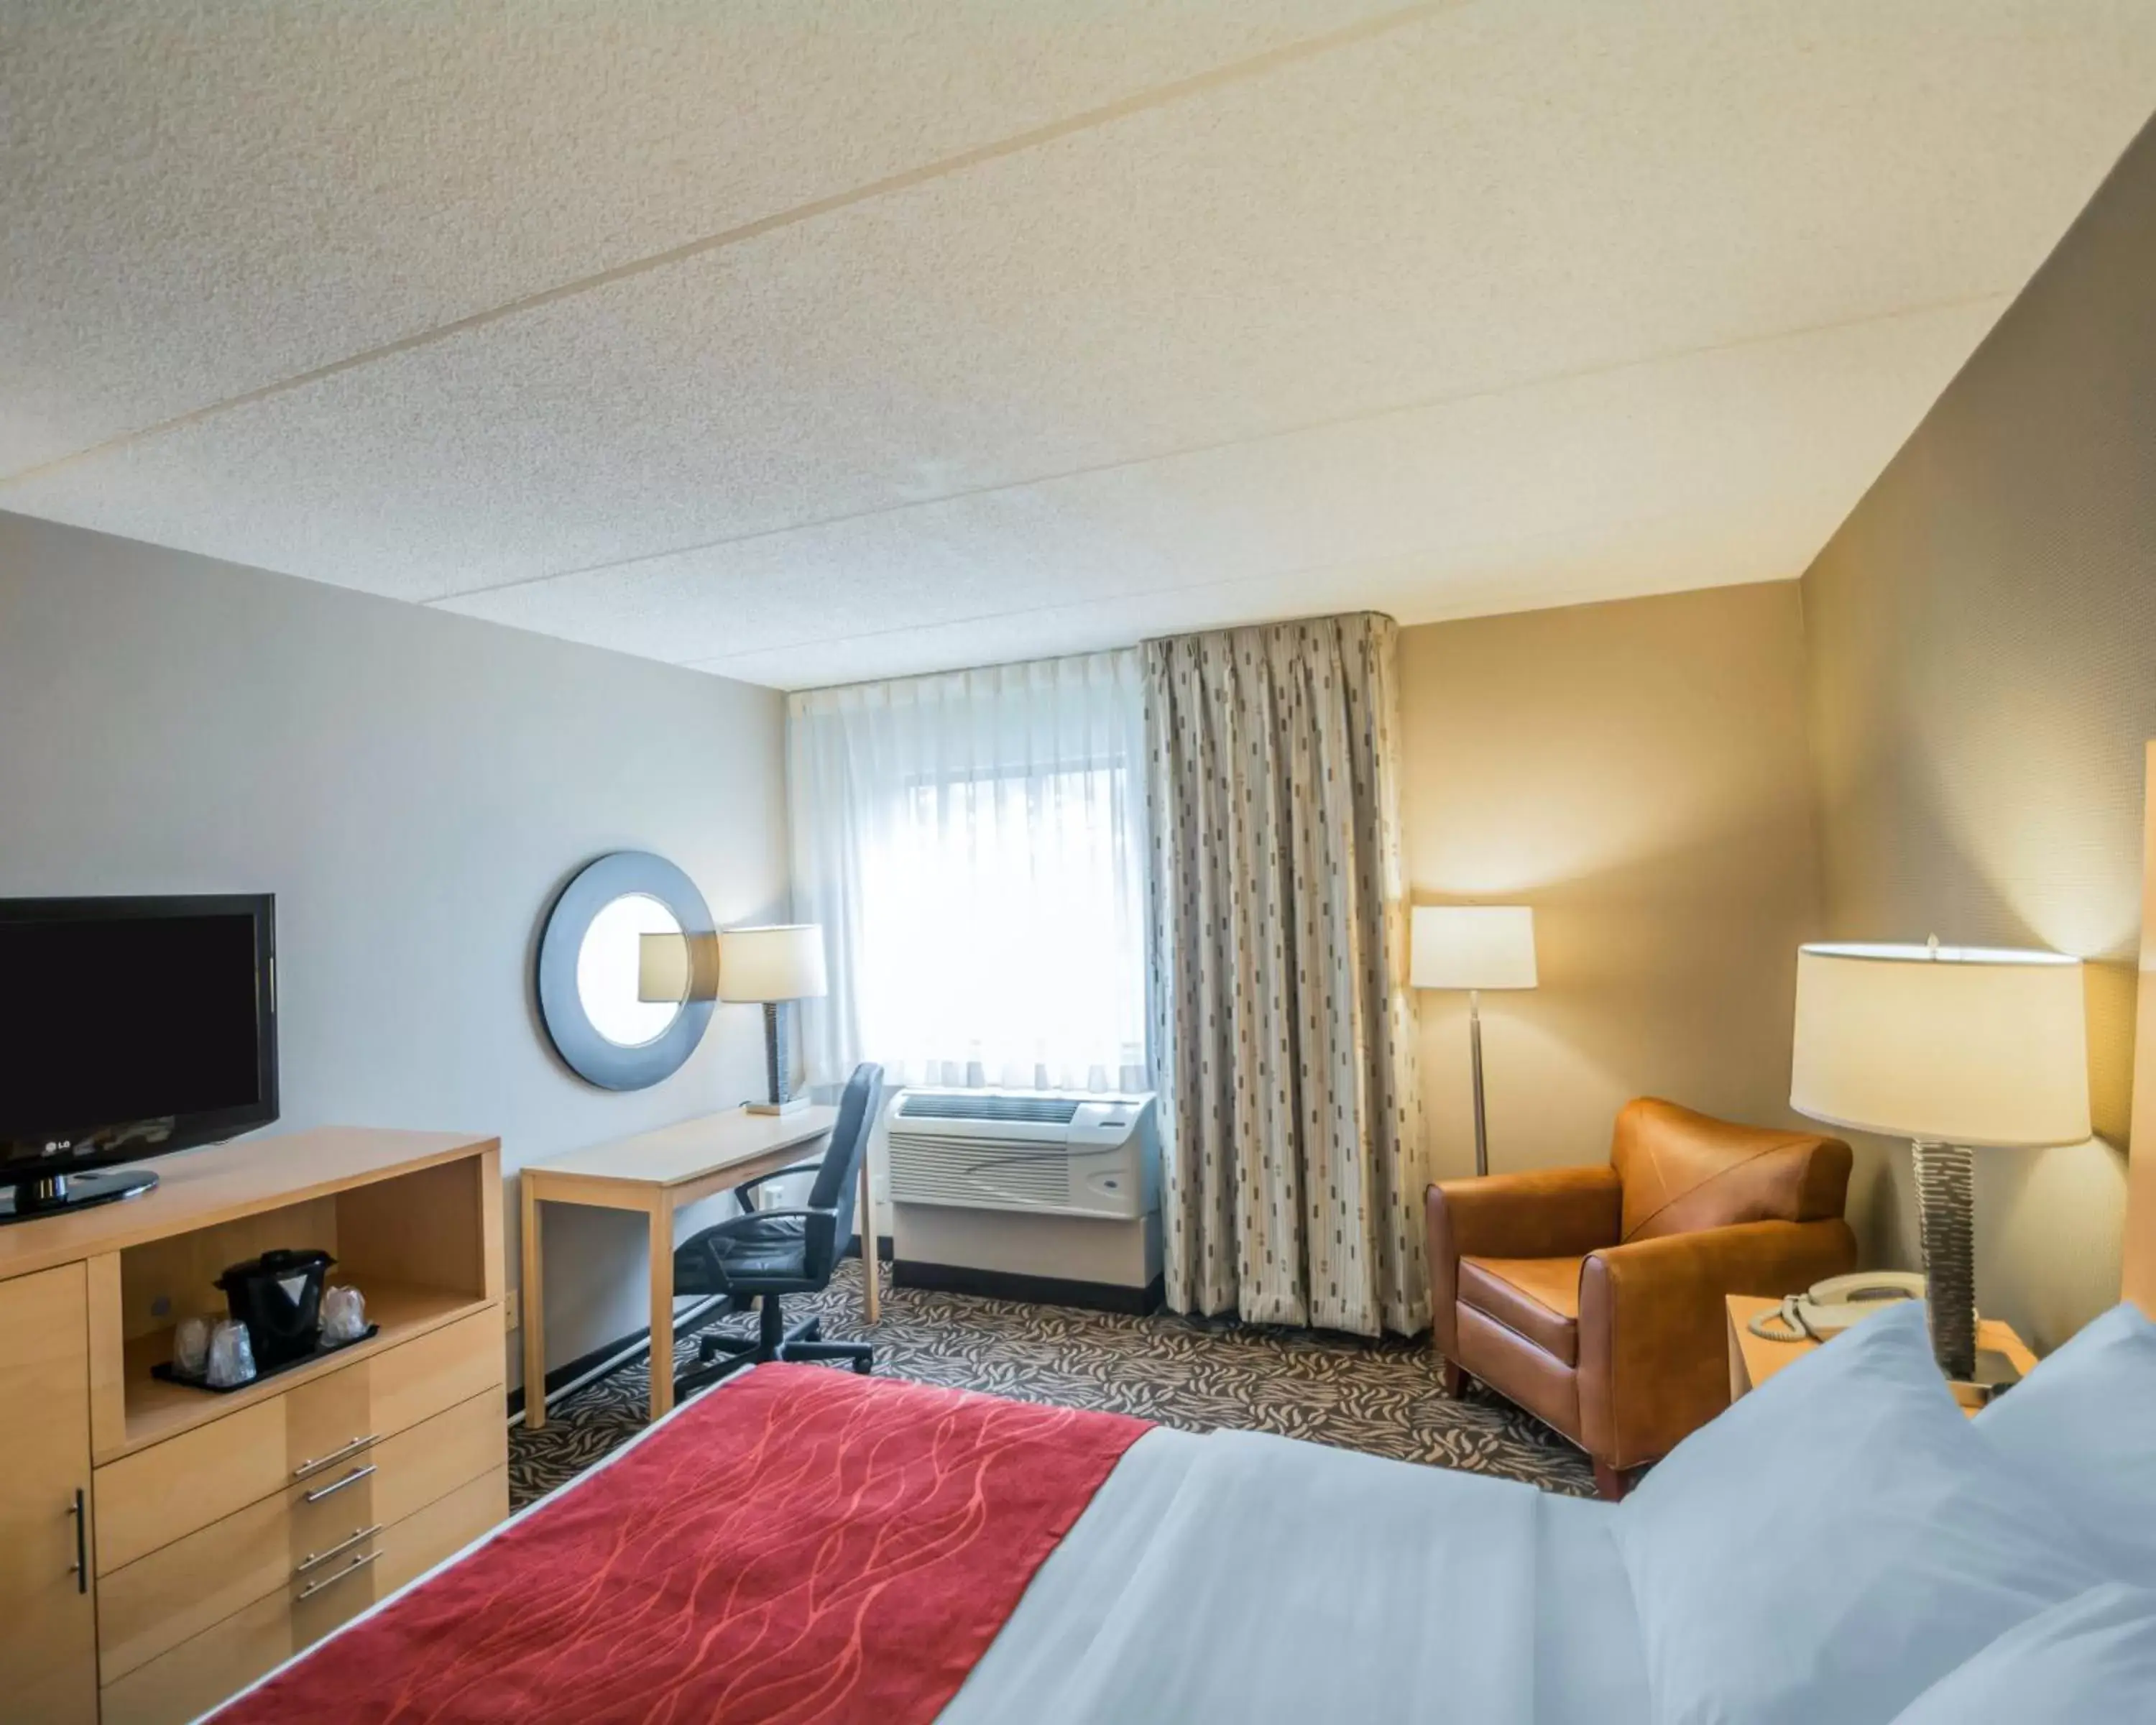 King Room with Whirlpool - Non-Smoking in Comfort Inn - NYS Fairgrounds